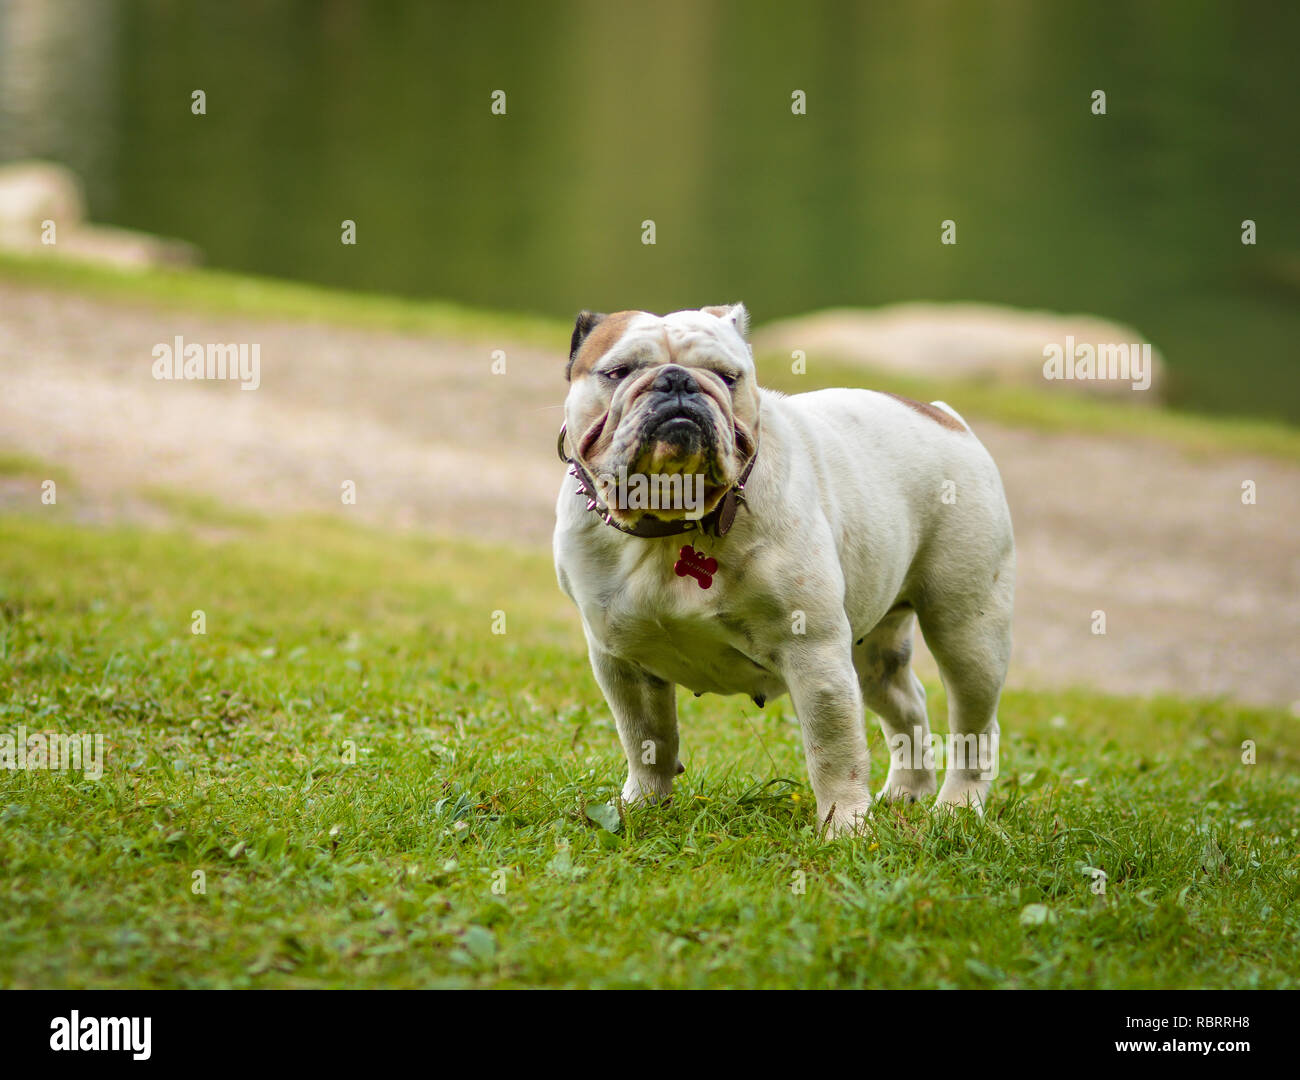 A brown and white English Bulldog running on the lawn looking playful and cheerful. The Bulldog is a muscular, heavy dog with a wrinkled face and a di Stock Photo